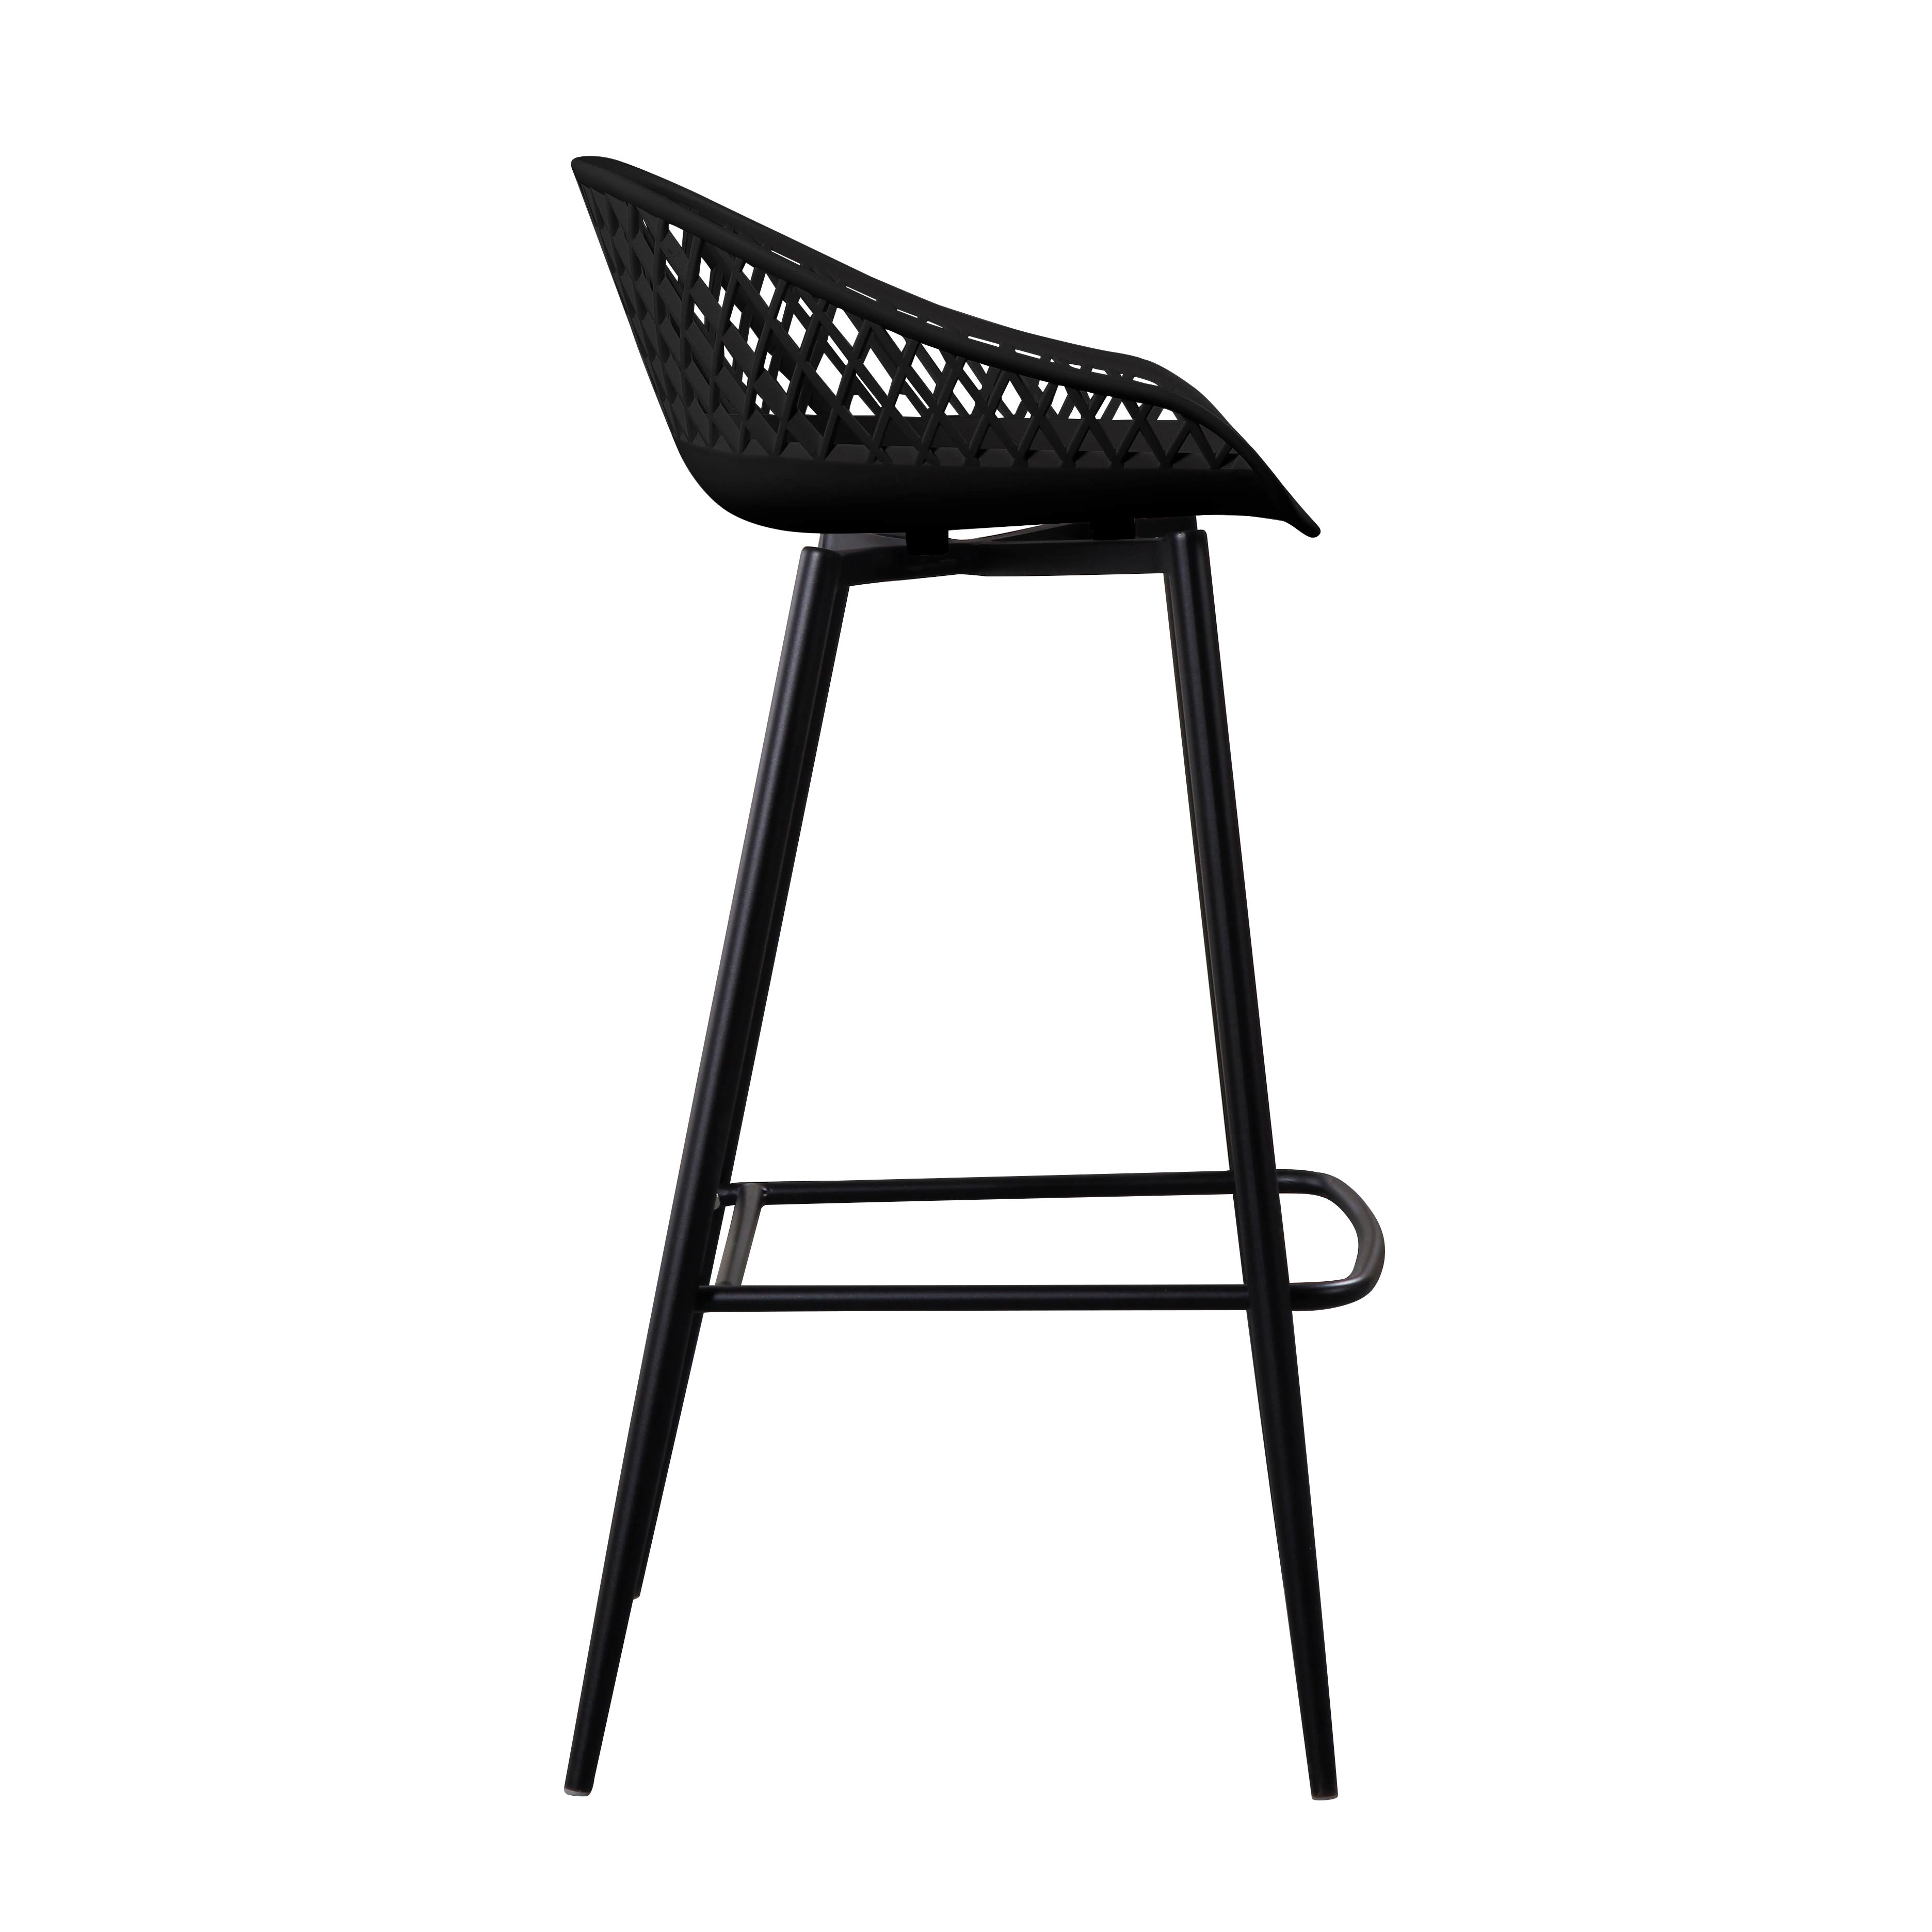 Wholesale Price China Buy Plastic Chair -
 Bar Chair-1695 – Forman